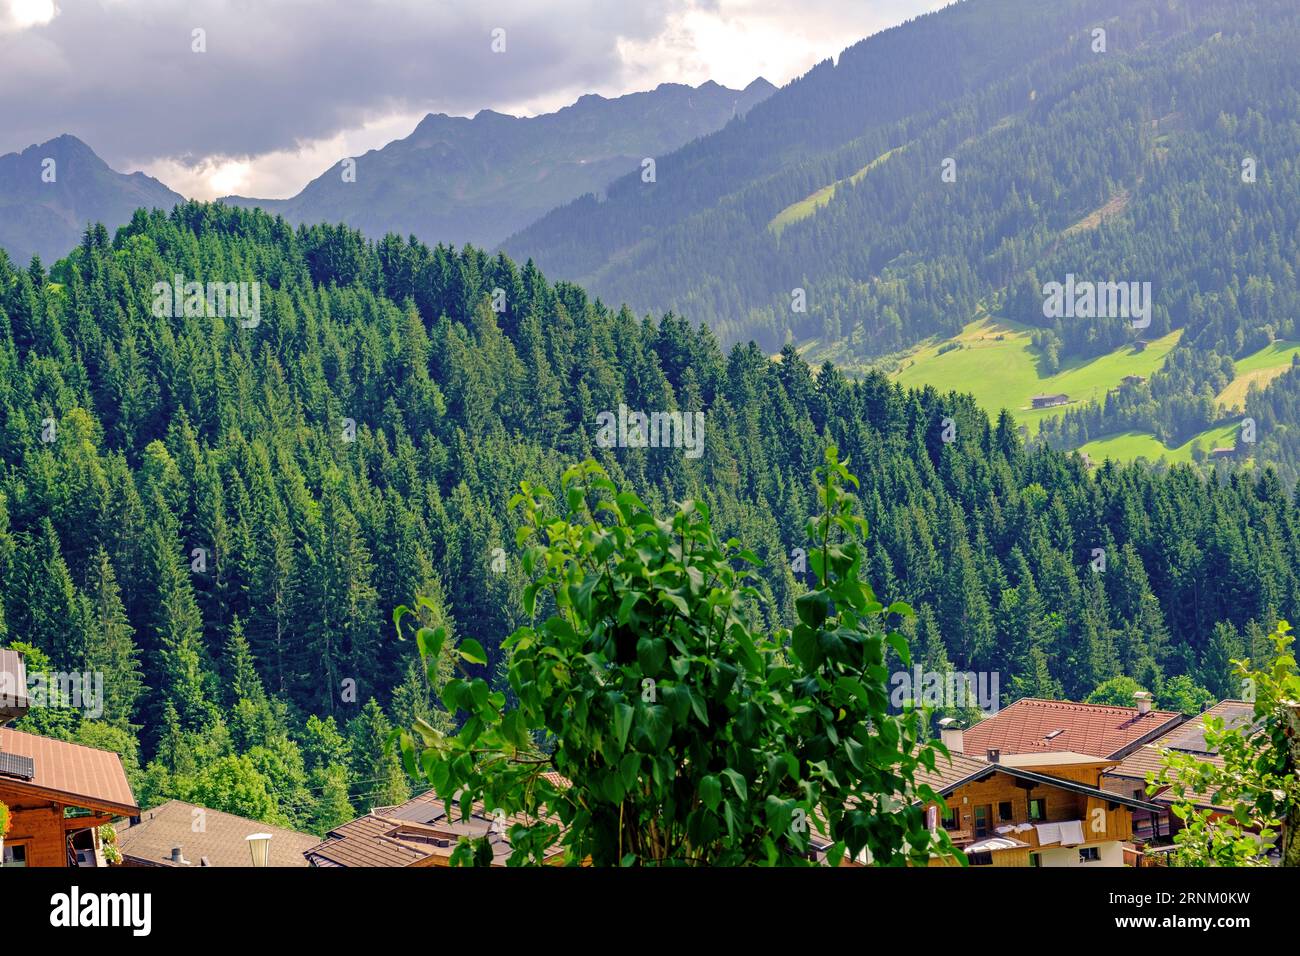 Looking down at trees and rooftops of Alpbach, village in Tyrol Alps, Austria, with mountains in background. Stock Photo